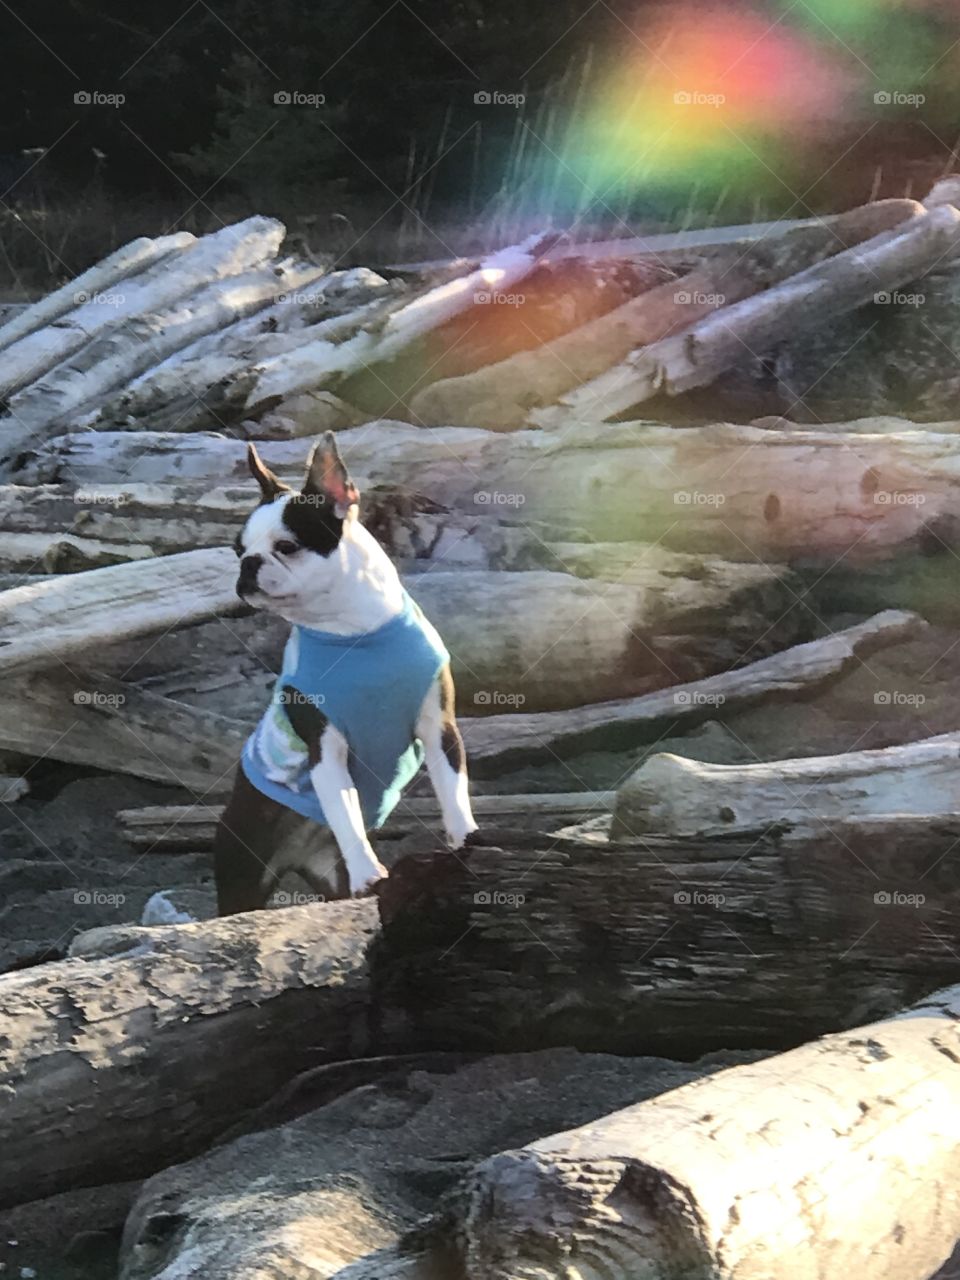 Another day at the beach with pups but this time some beautiful late afternoon winter sun warmed us while we took in the view. A little reflected light created a little prismatic rainbow effect. 